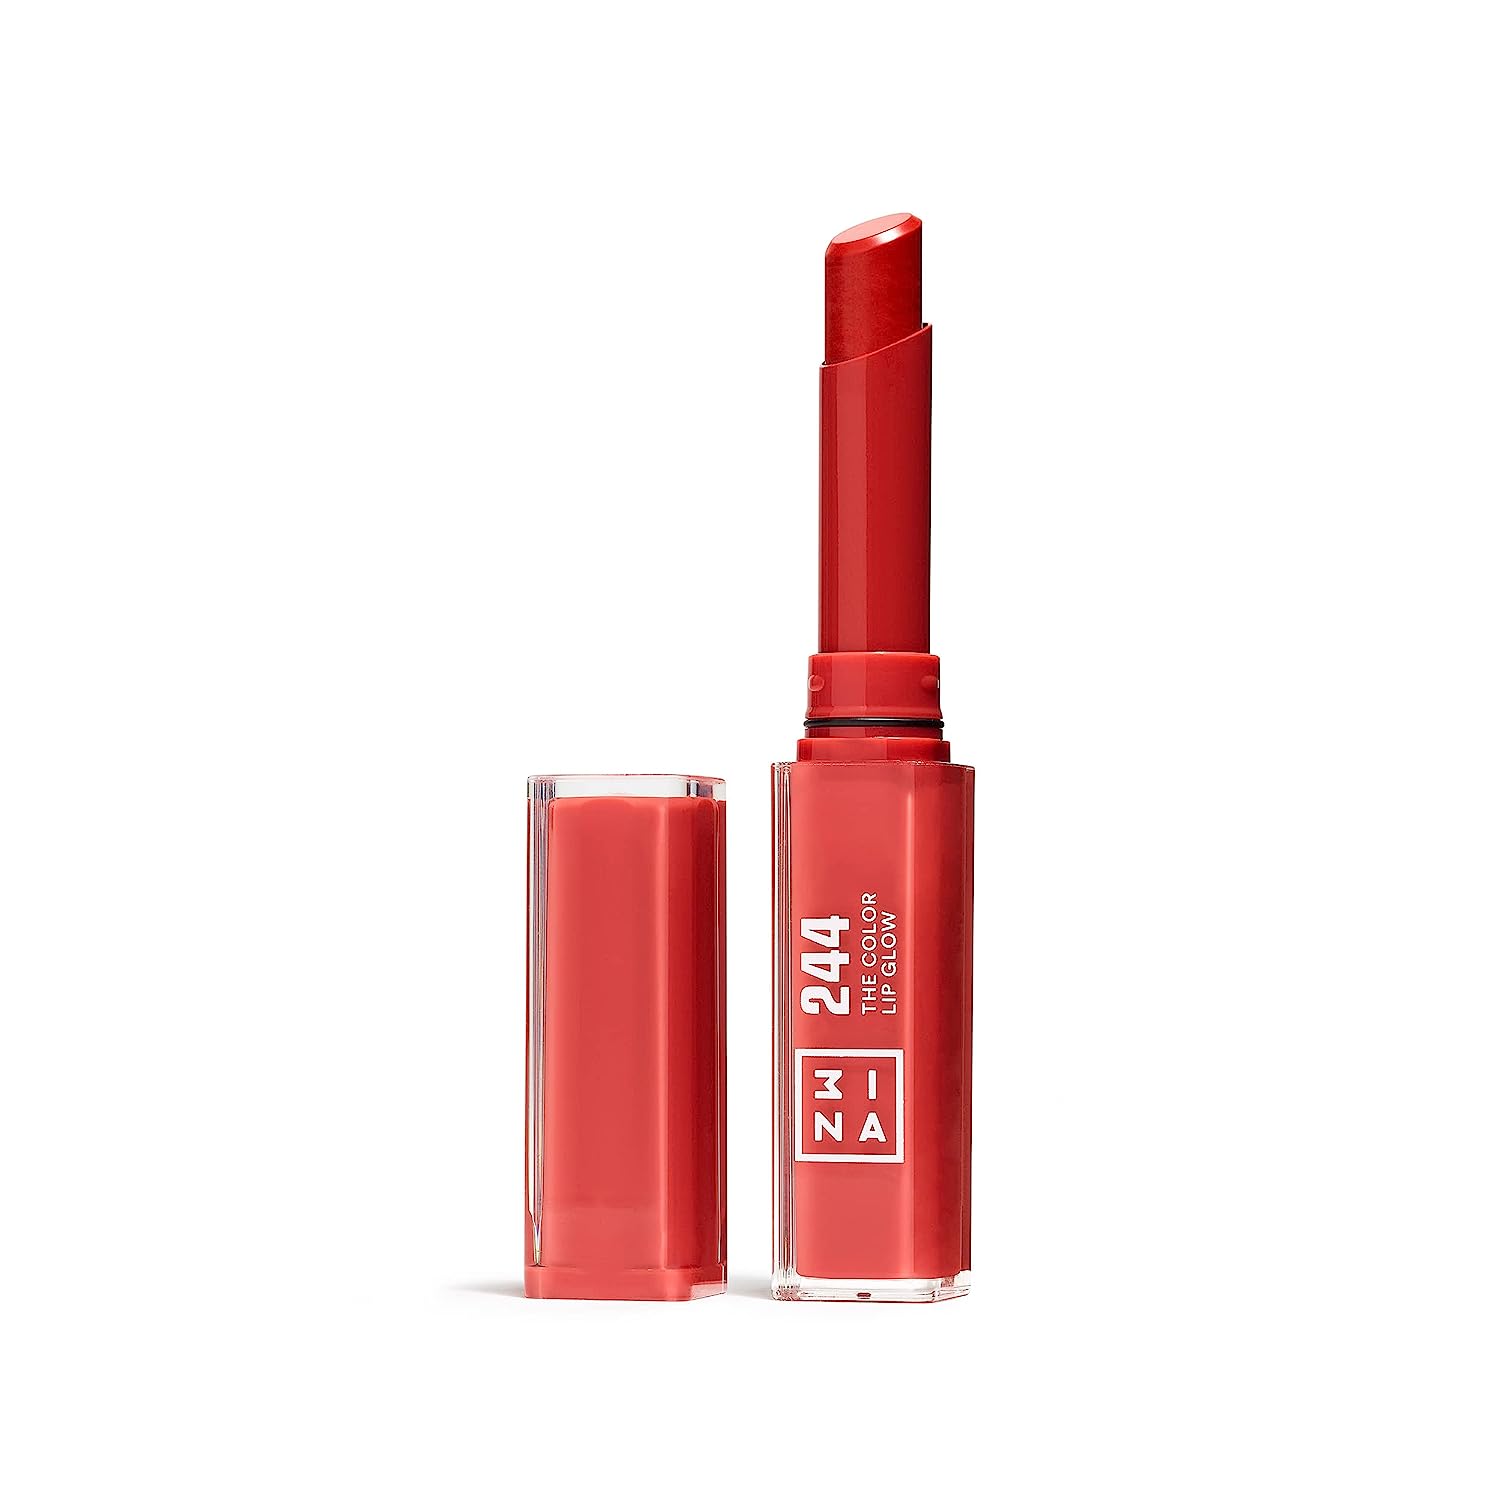 3ina Makeup - The Color Lip Glow 244 - Bright Red Lipstick - Glowy Juicy Lip Pen with Vitamin E for Nourishing Lips - Highly Pigmented - Vegan - Cruelty Free